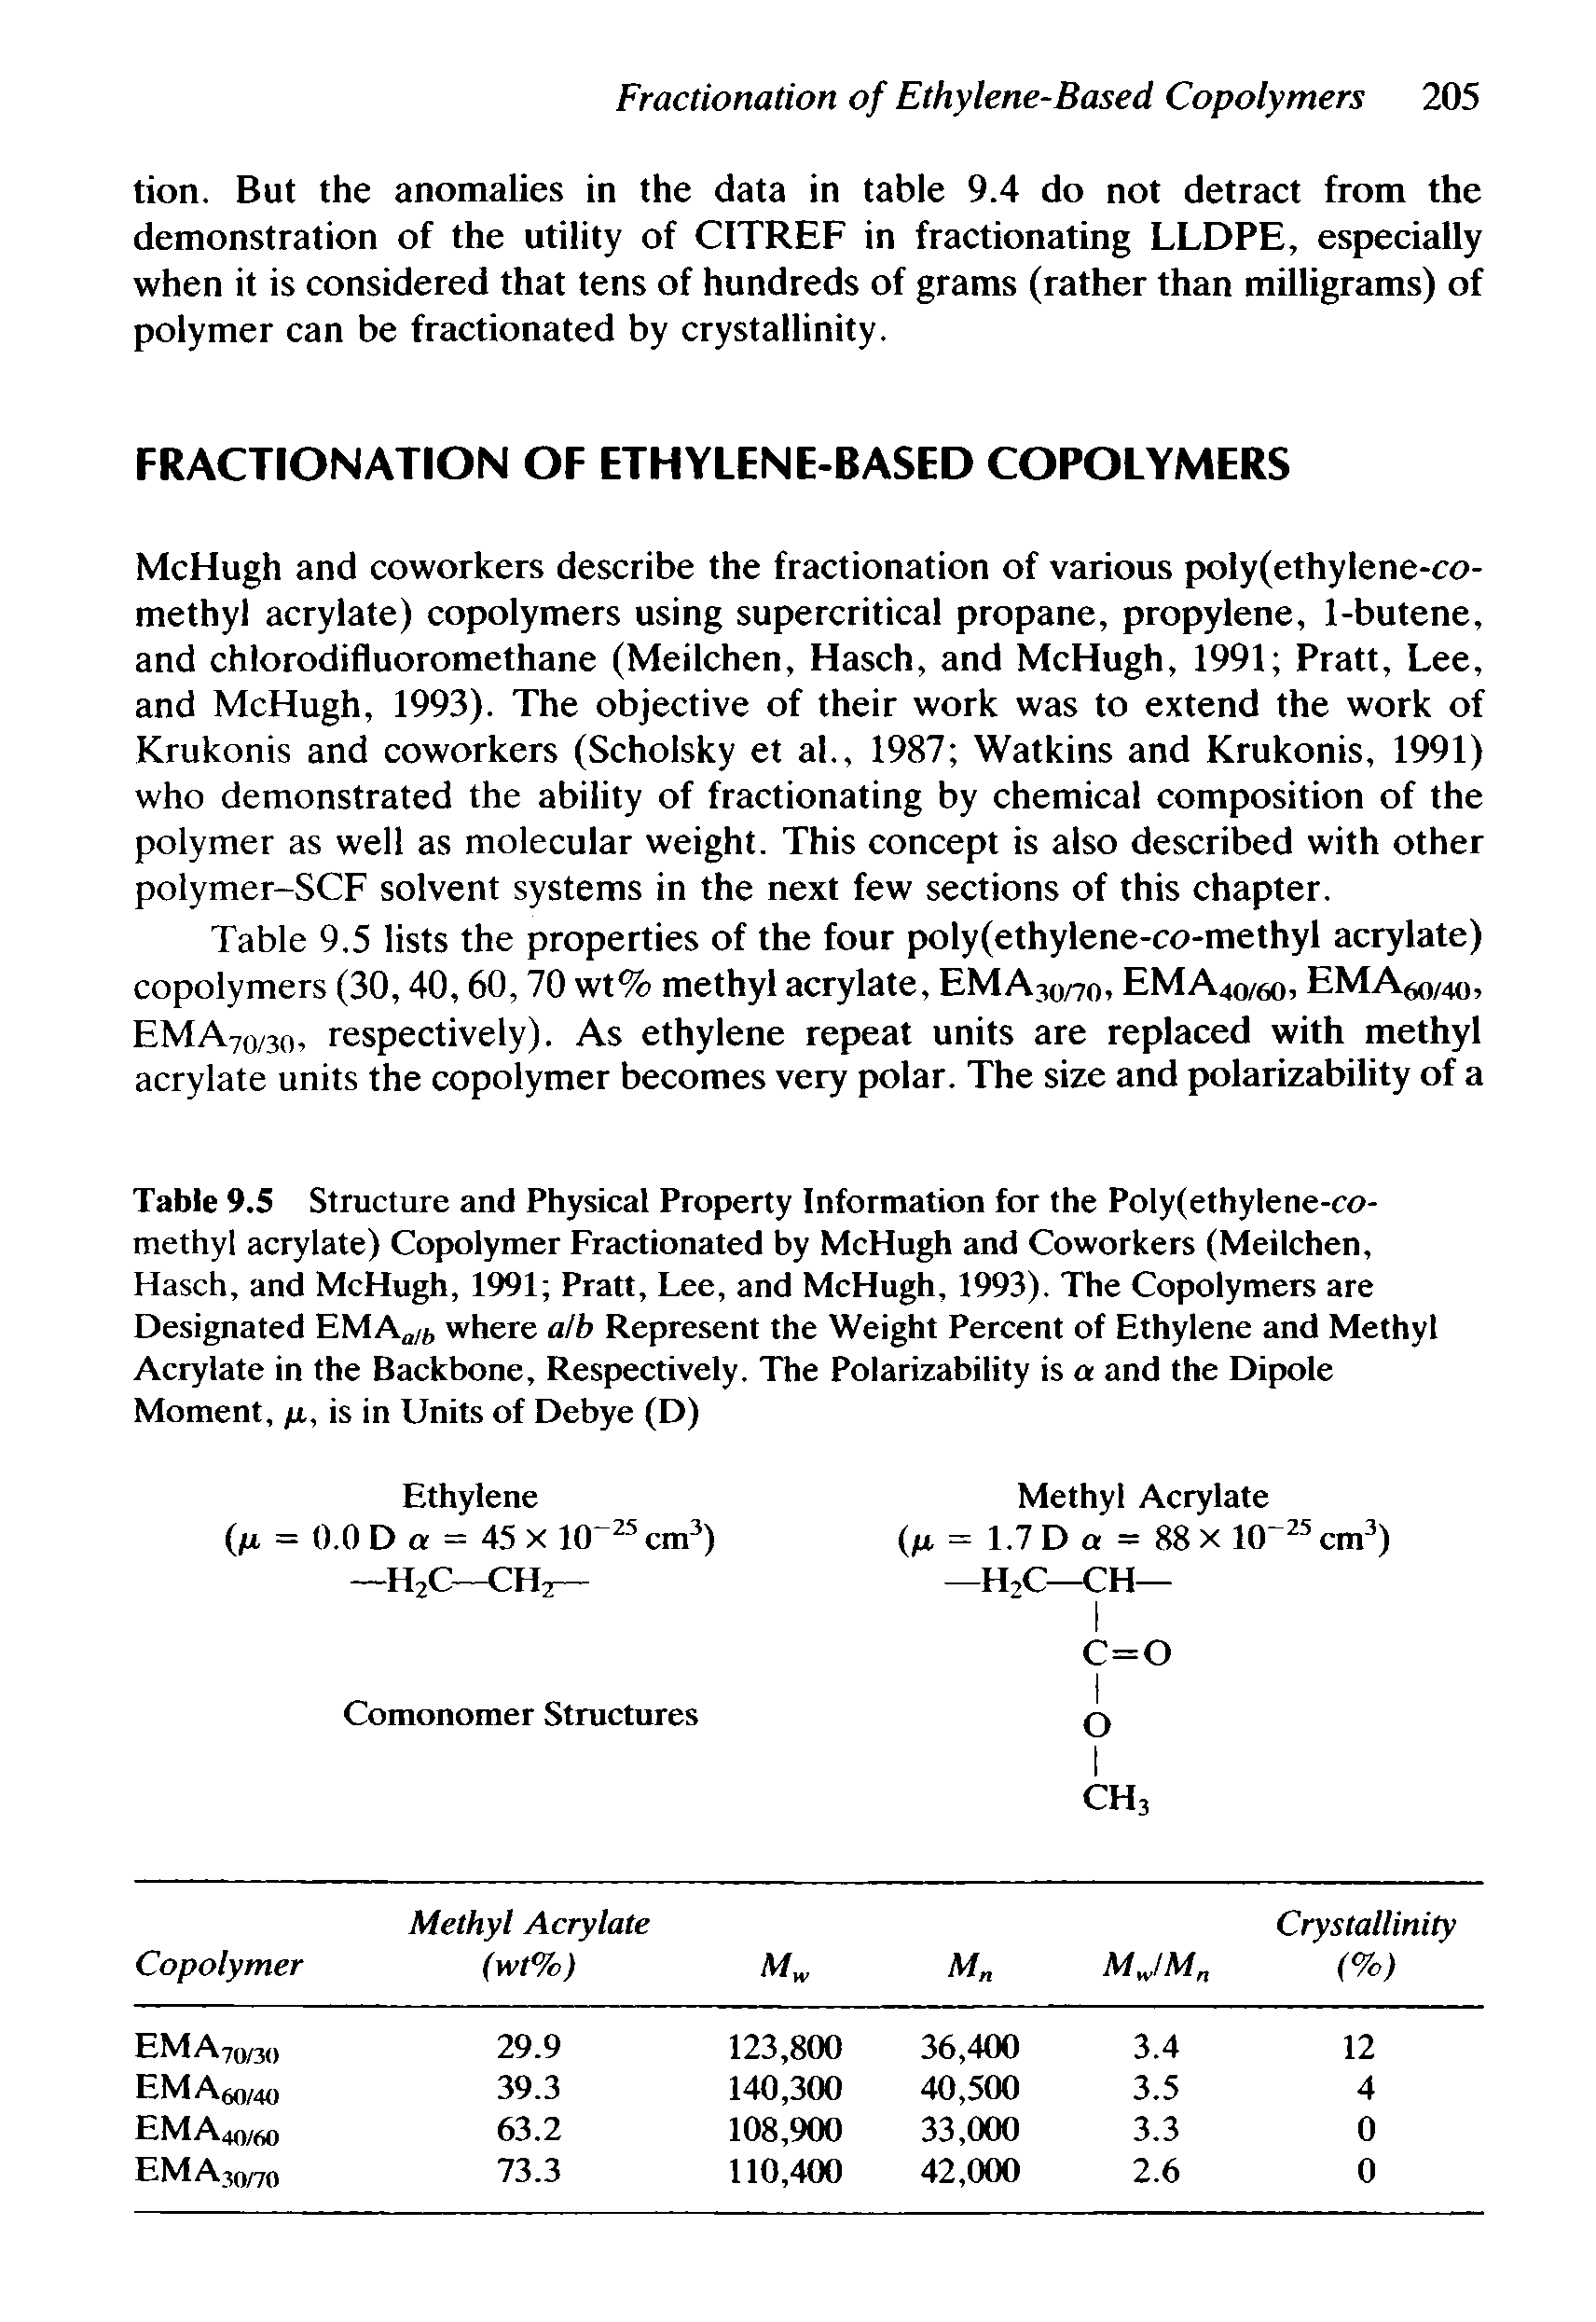 Table 9.5 Structure and Physical Property Information for the Poly(ethylene-co-methyl acrylate) Copolymer Fractionated by McHugh and Coworkers (Meilchen, Hasch, and McHugh, 1991 Pratt, Lee, and McHugh, 1993). The Copolymers are Designated EMA /j where alb Represent the Weight Percent of Ethylene and Methyl Acrylate in the Backbone, Respectively. The Polarizability is a and the Dipole Moment, jx, is in Units of Debye (D)...